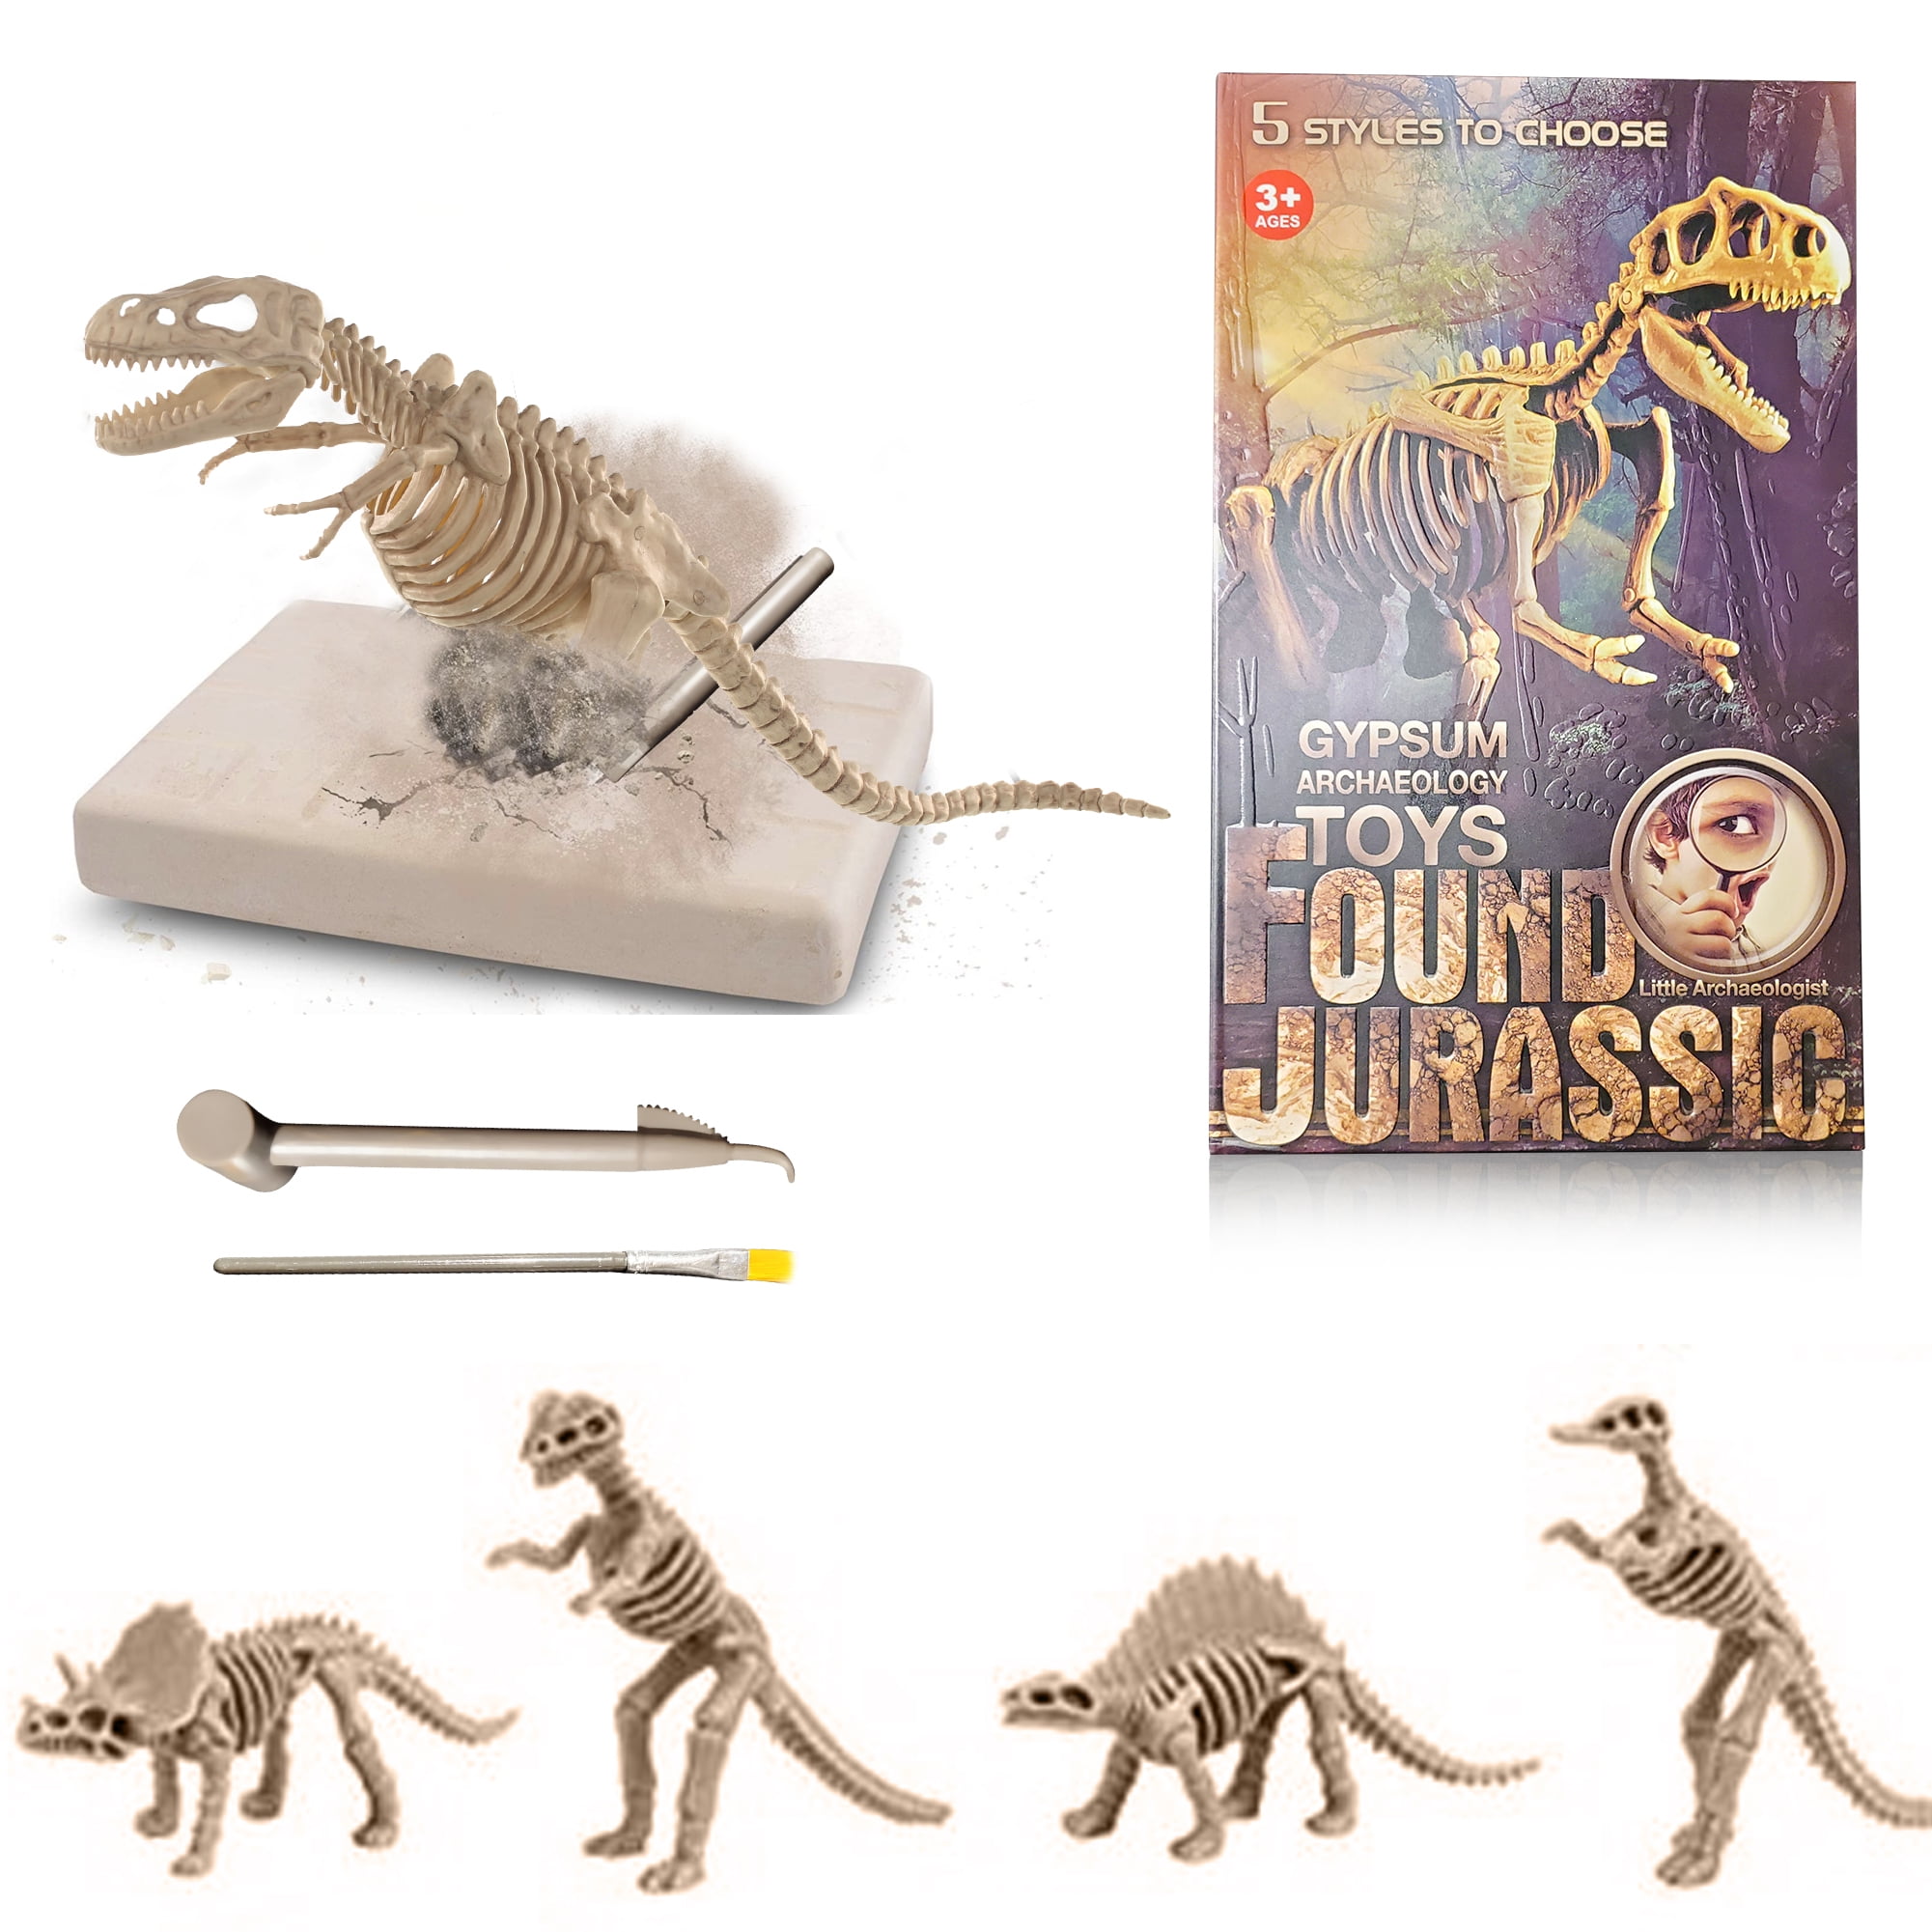 DINOSAUR FOSSIL DIG IT OUT EXCAVATION SCIENCE KIT 